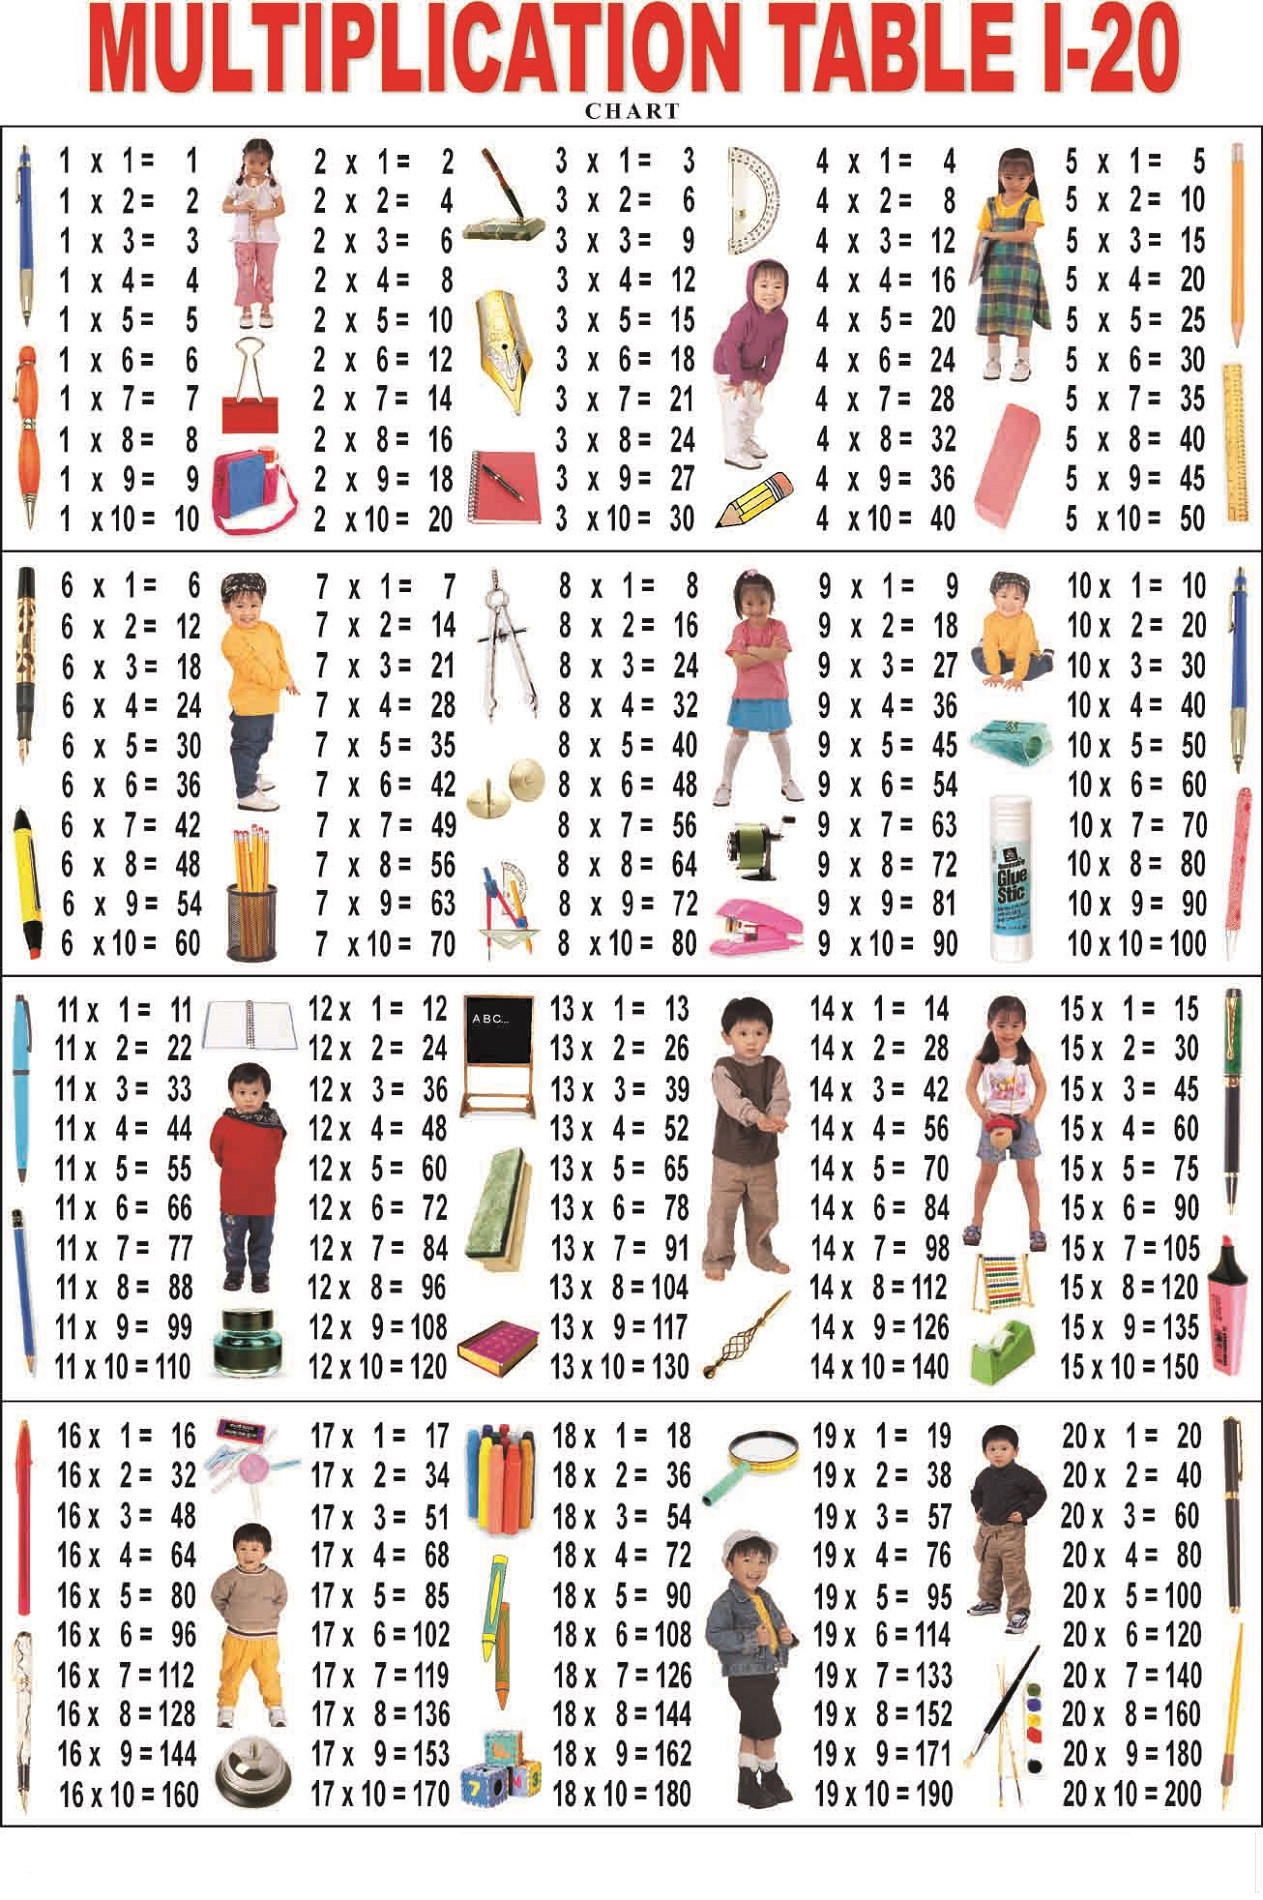 Times Table Chart 1 20 Fresh 39 Tables 1 To 20 For Kids